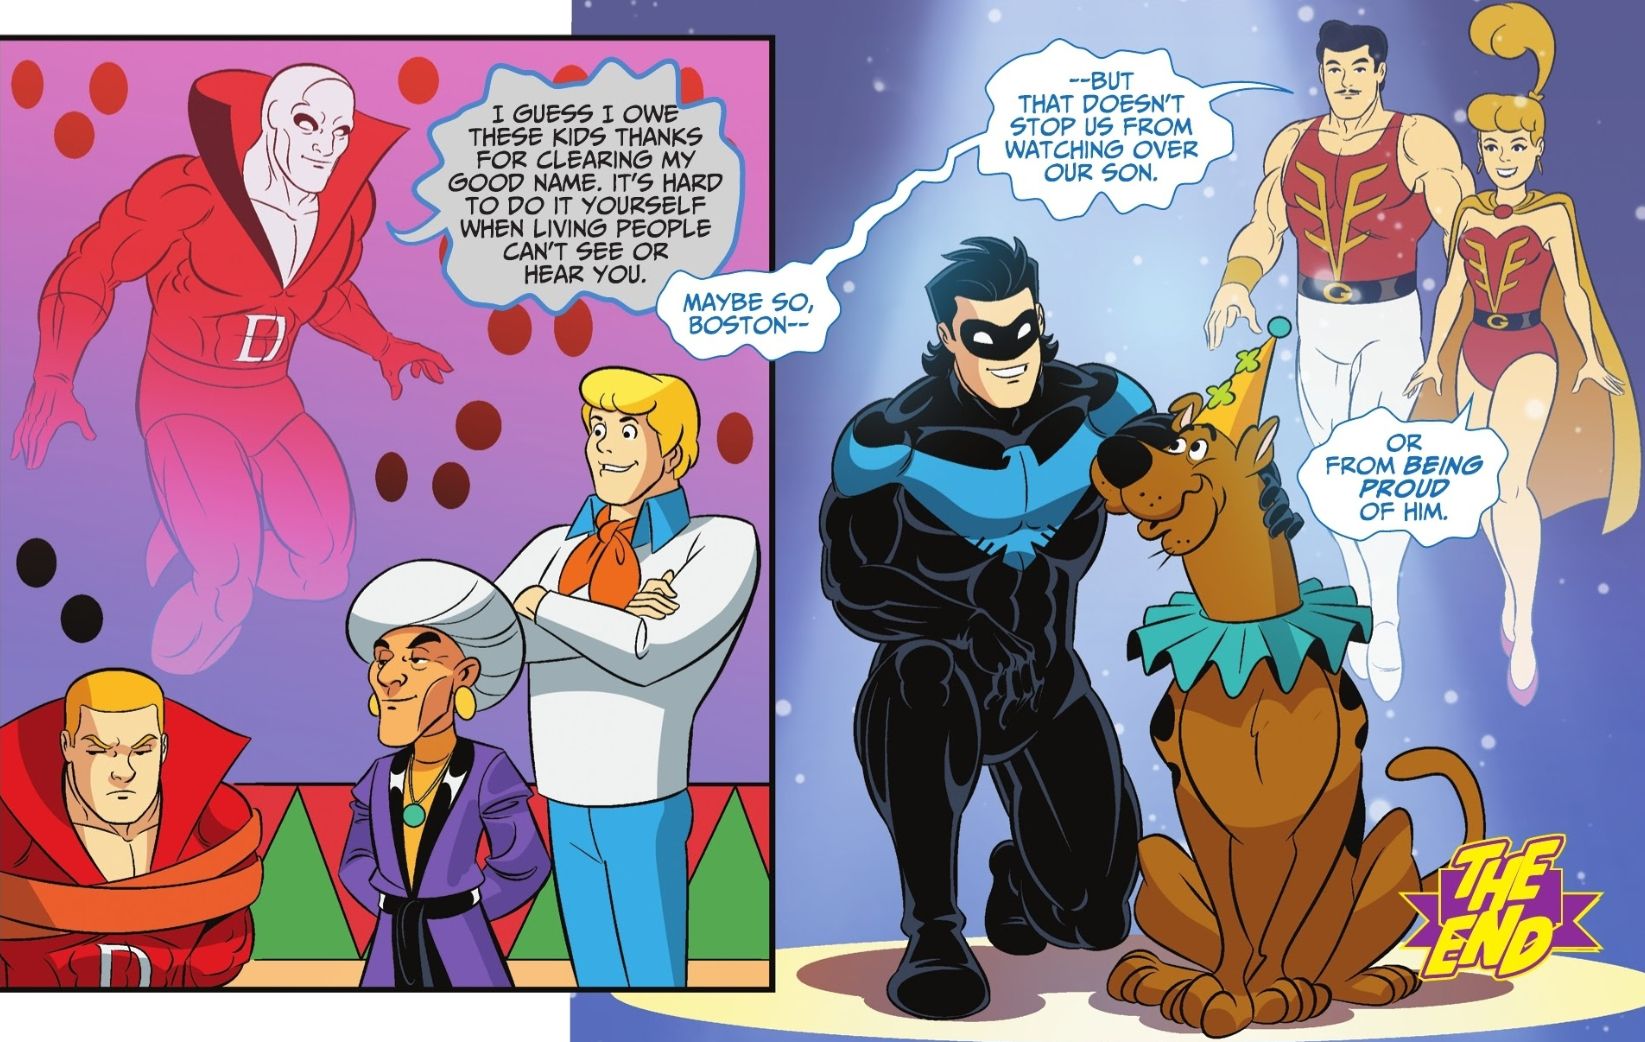 Batman & Scooby-Doo Mysteries #1, Nightwing's parents watch over him from beyond the grave